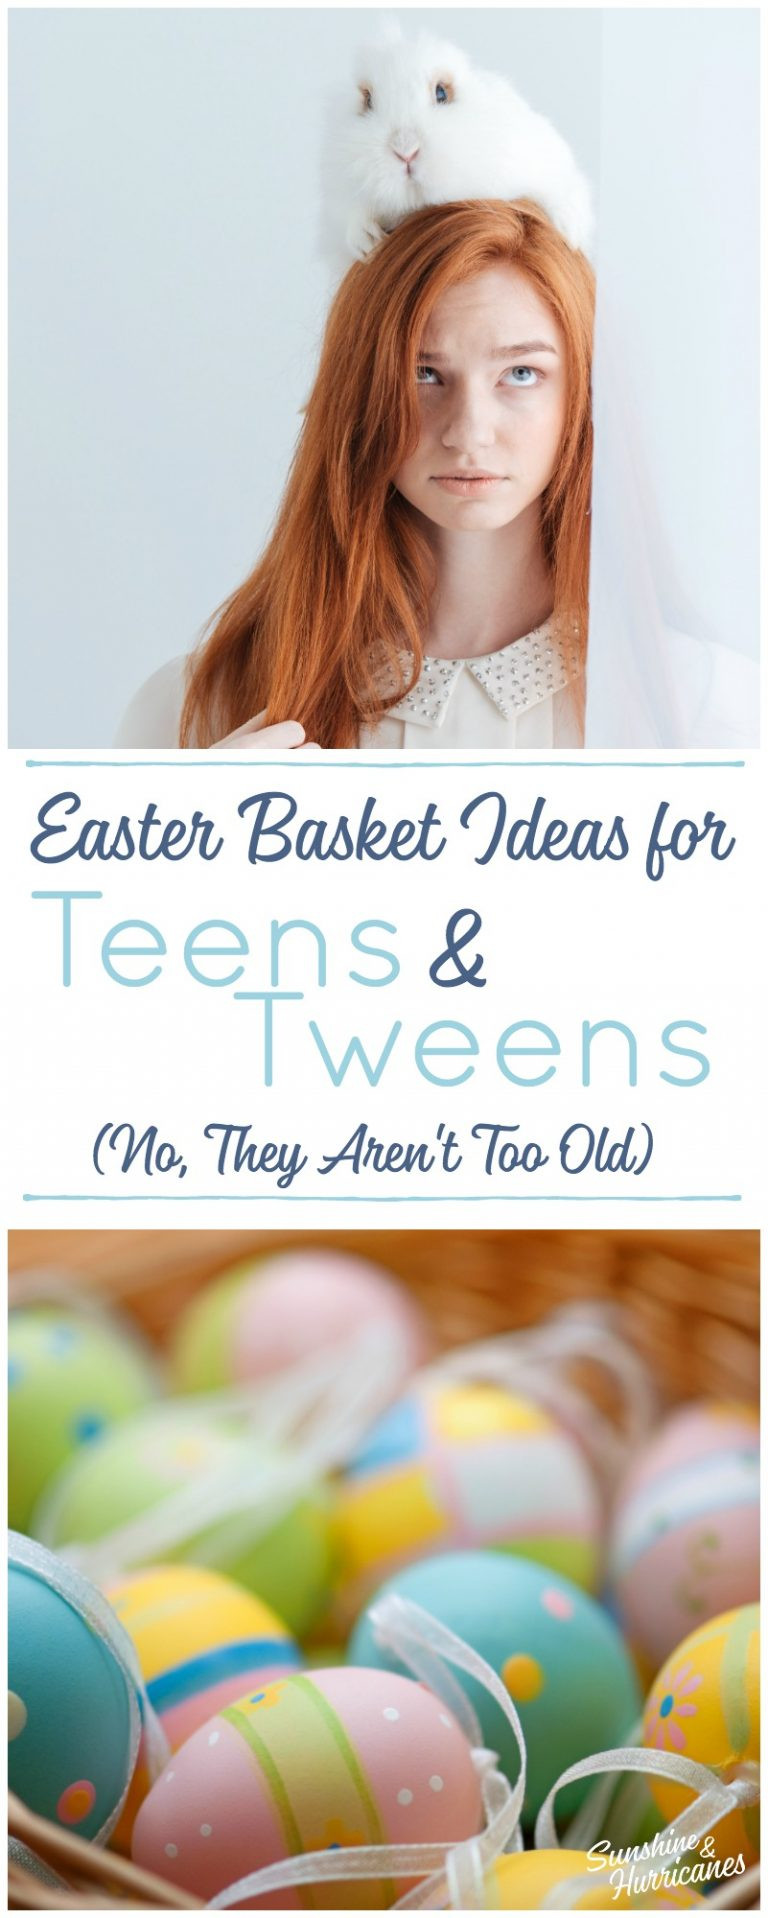 Easter Ideas For Tweens
 Easter Basket Ideas For Tweens and Teens No They re NOT